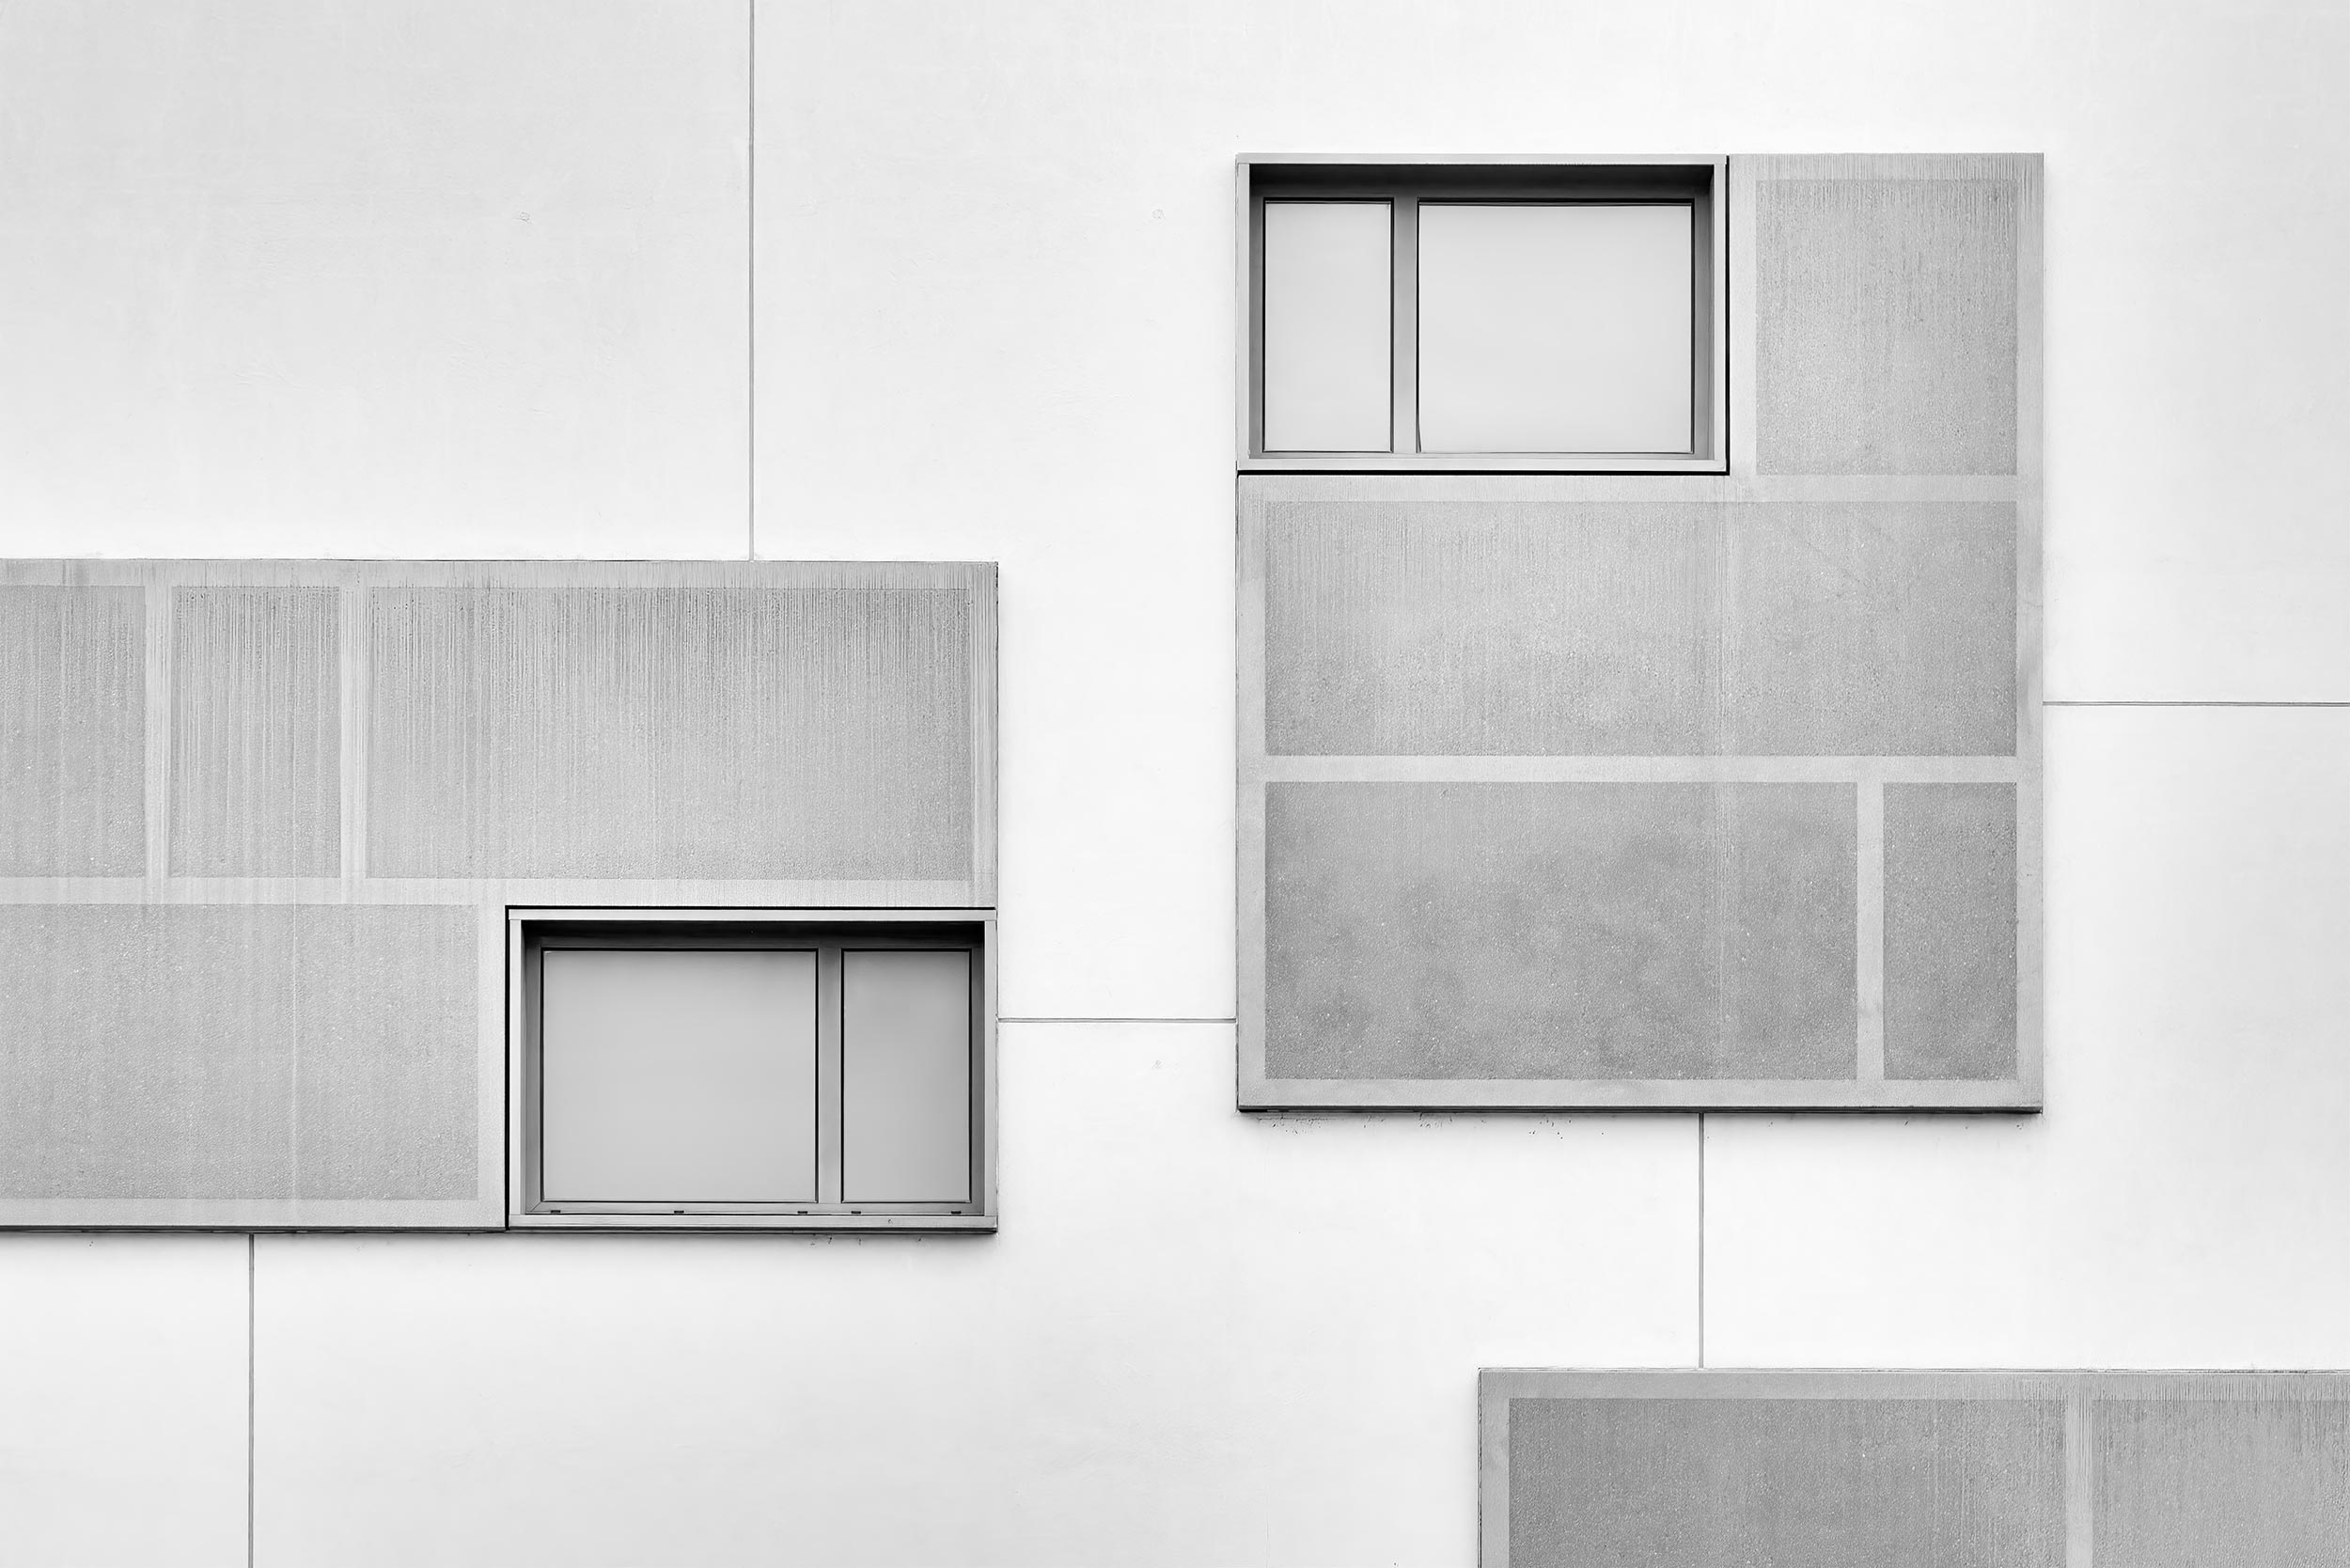 Evangelical University of Dresden, Architecture Photography, Black & White